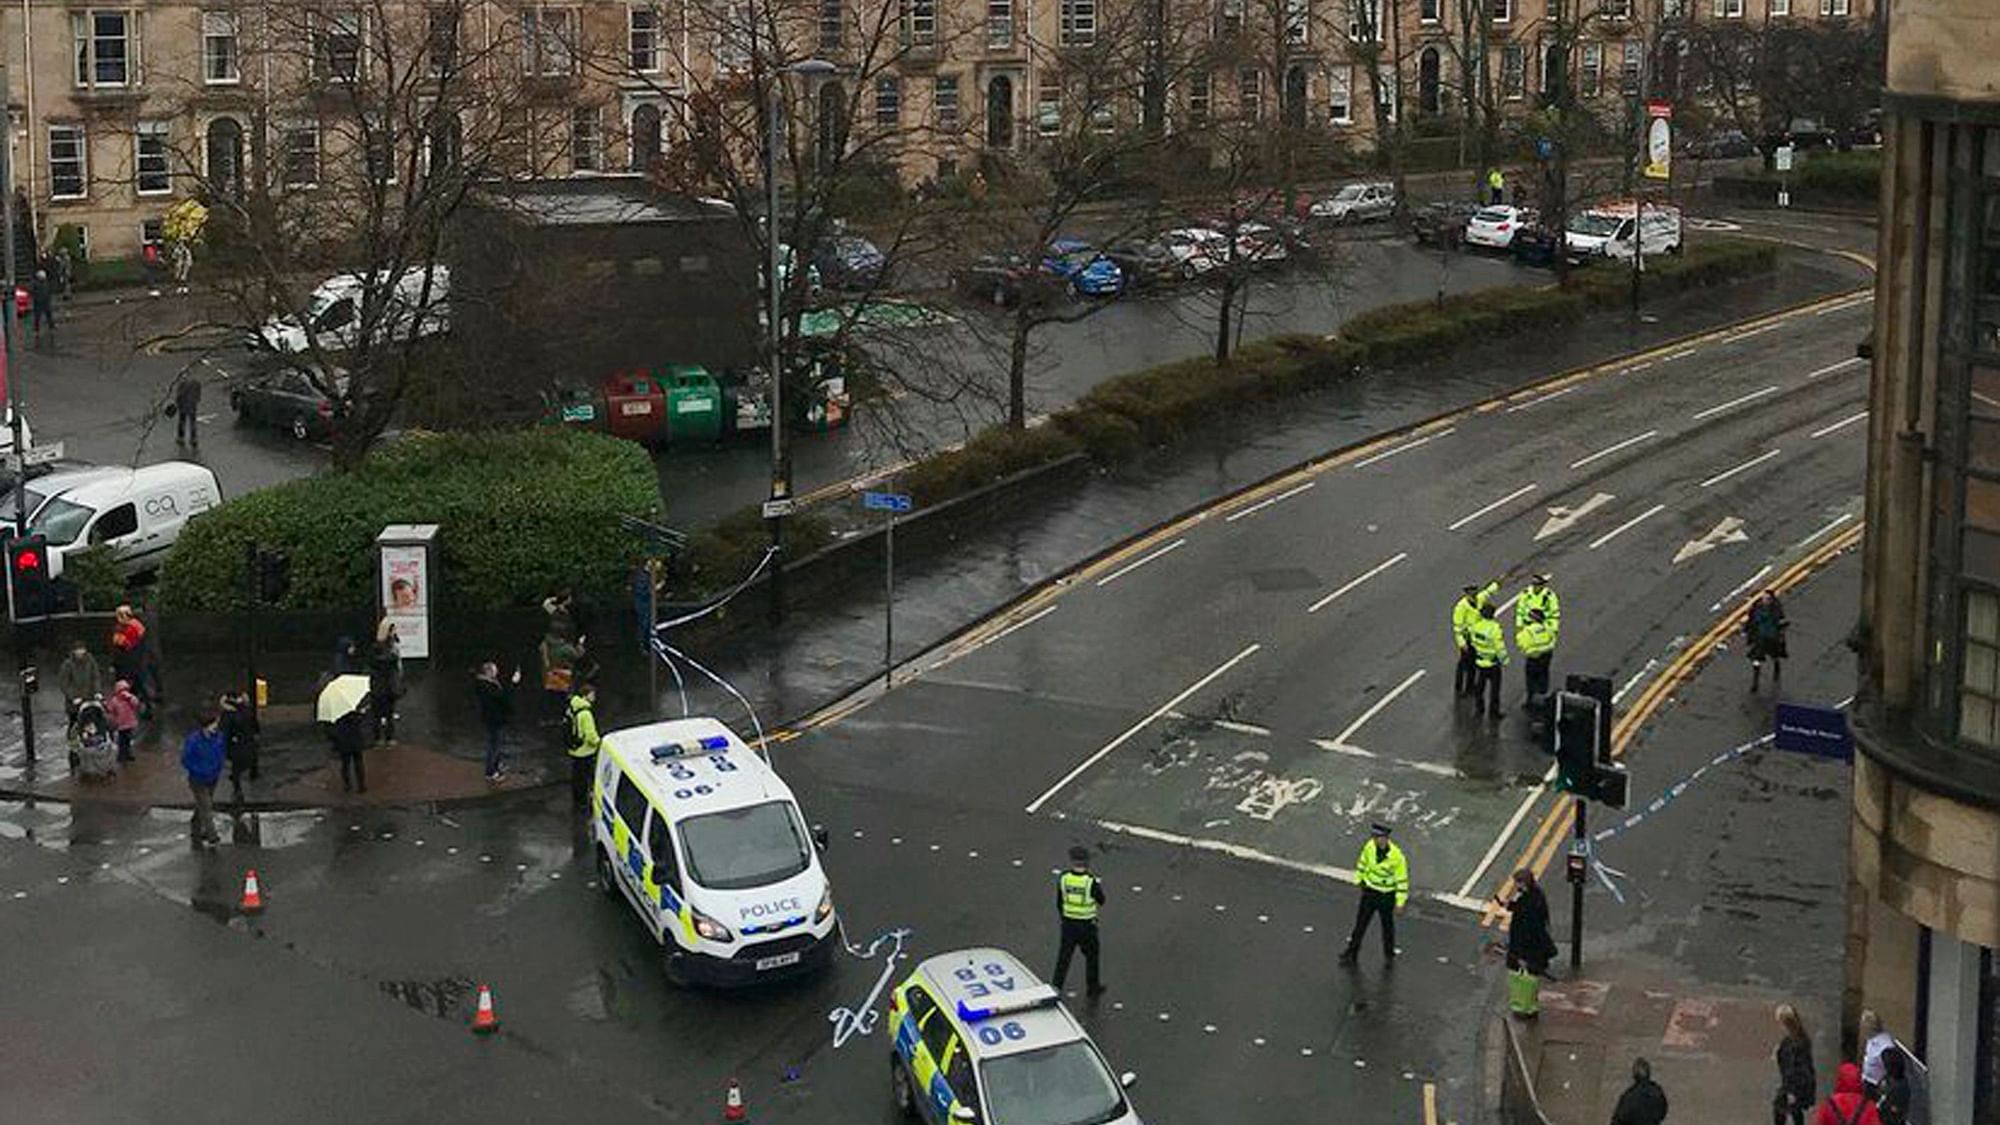 The scene as police secure the area outside the University of Glasgow, Scotland, after a suspicious package was found at the university.